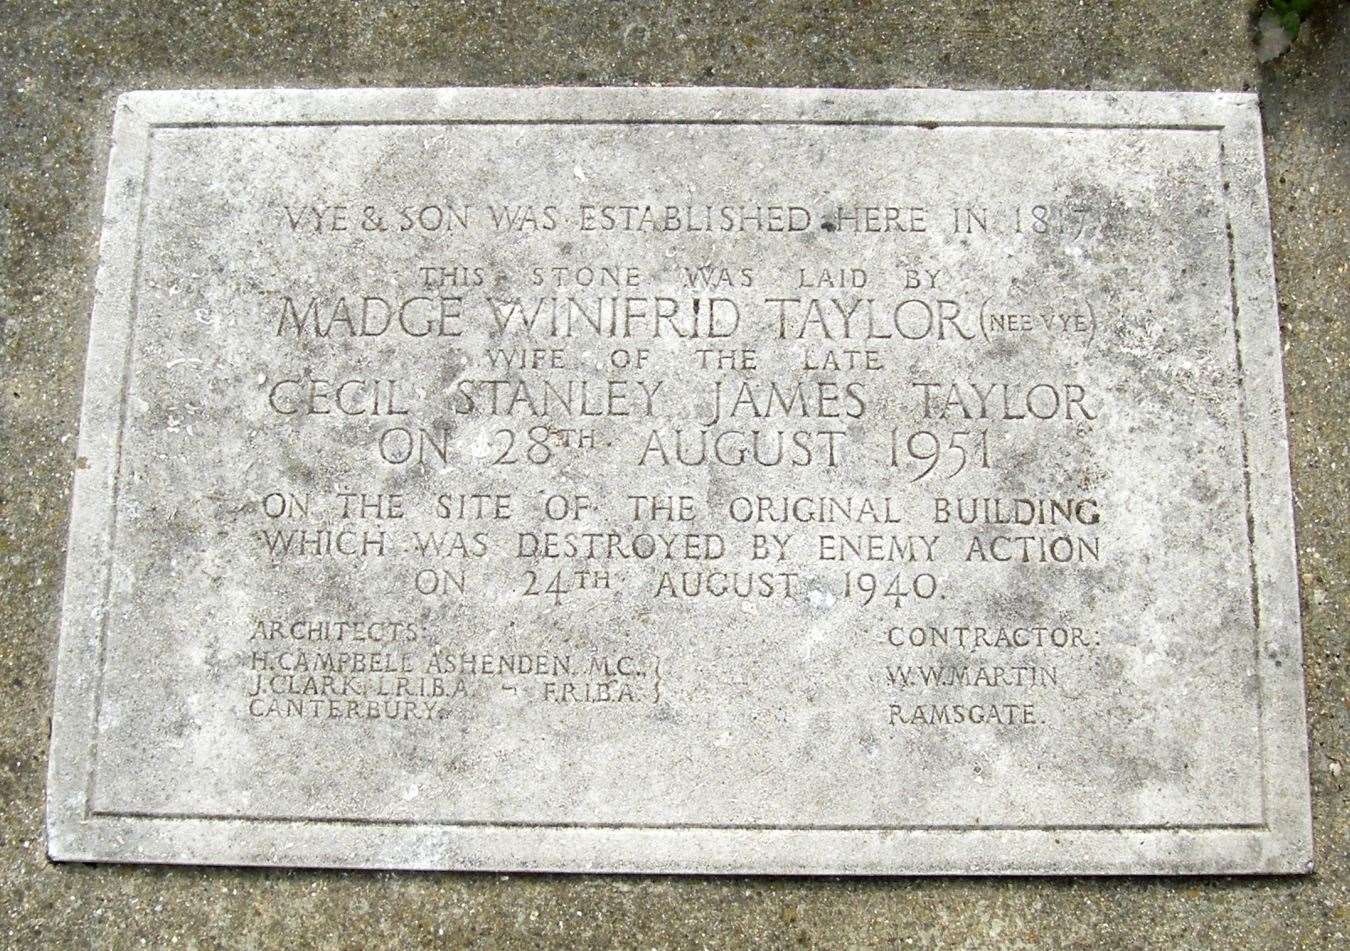 The memorial stone marking the bombing of the Vye and Son headquarters was laid by Madge Vye